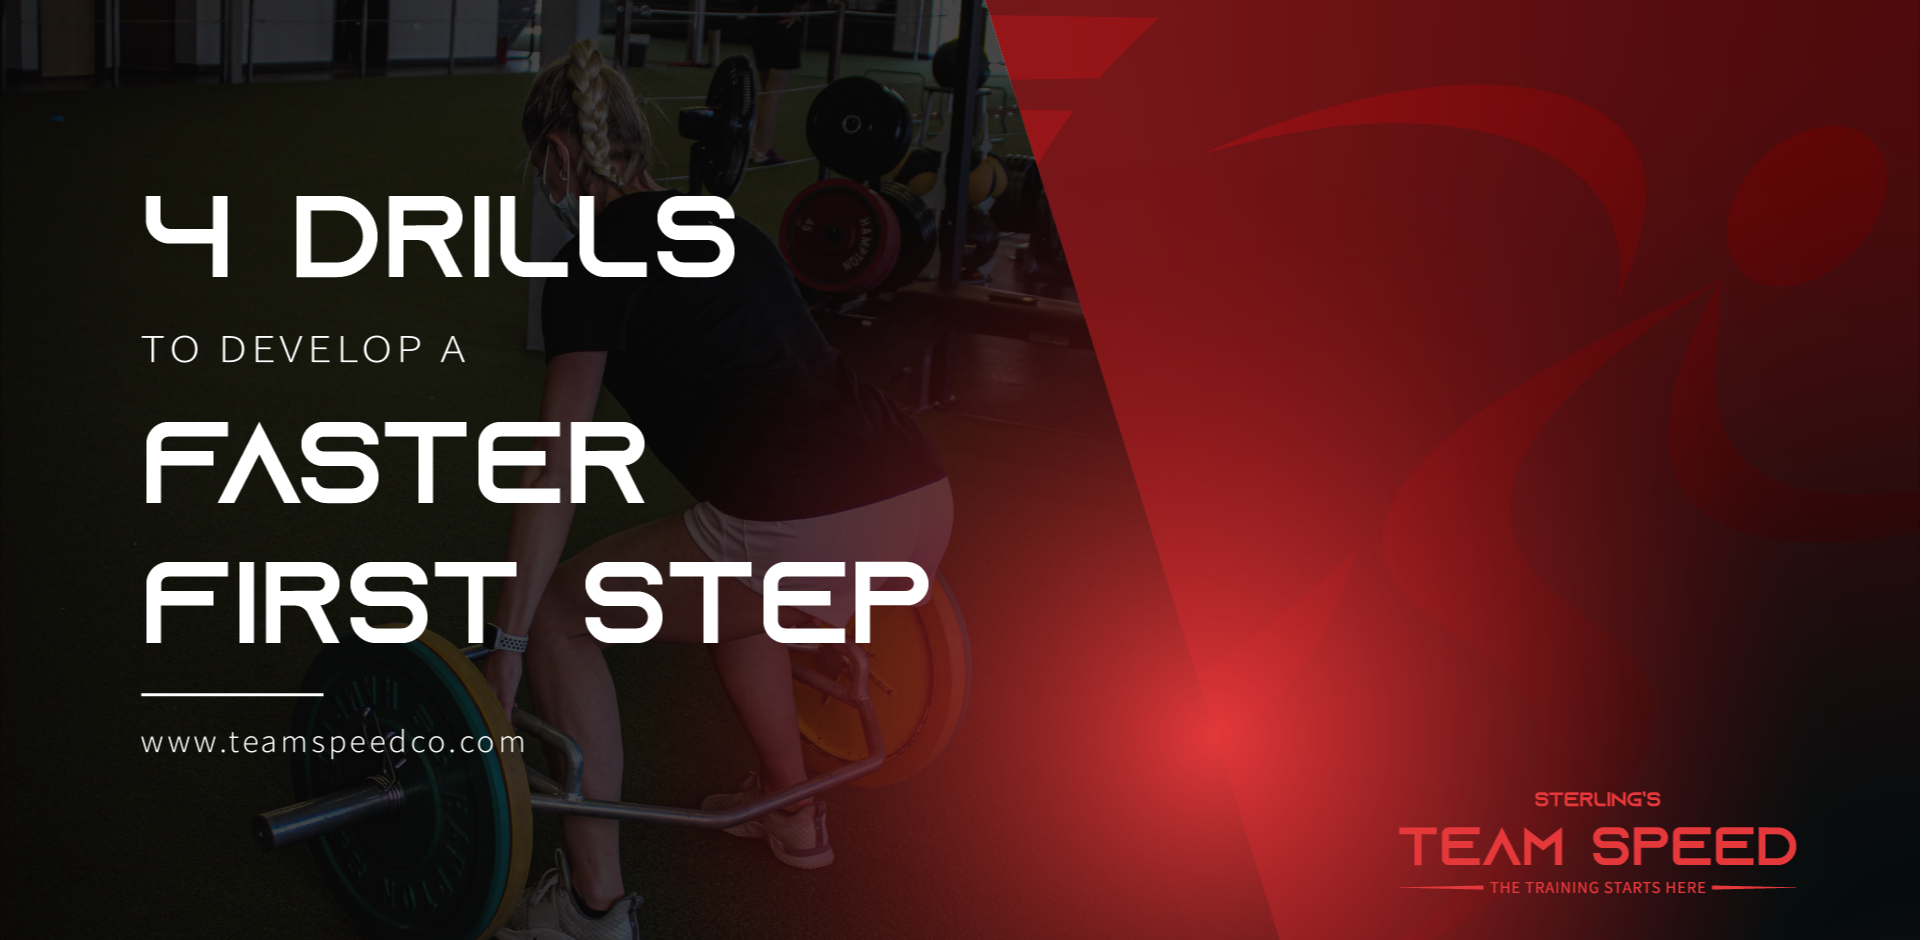 
4 Drills to Develop a Faster First Step